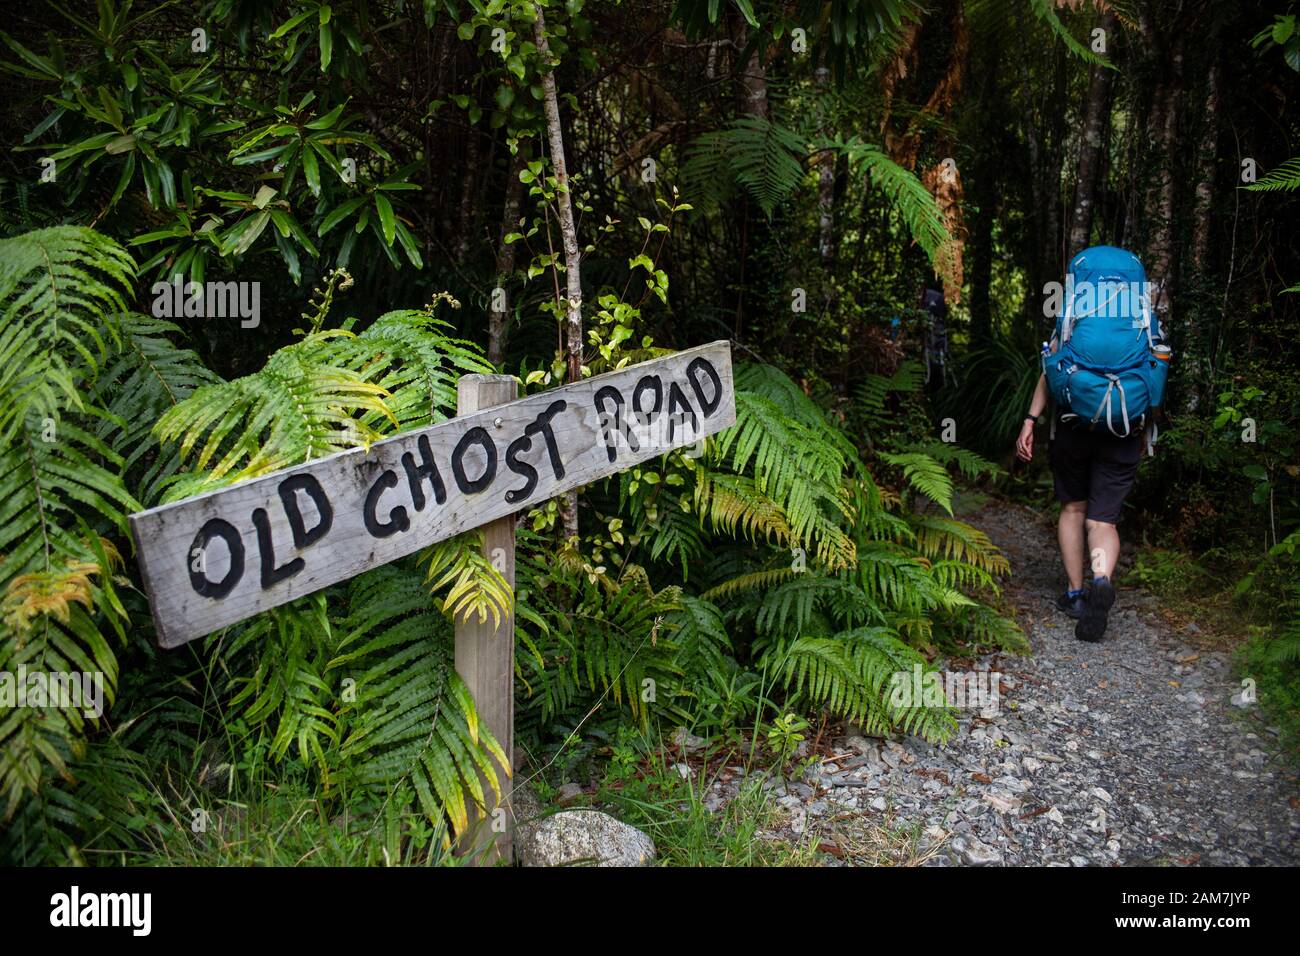 Old Ghost Road Trail, Neuseeland - in Richtung Seddonville Stockfoto